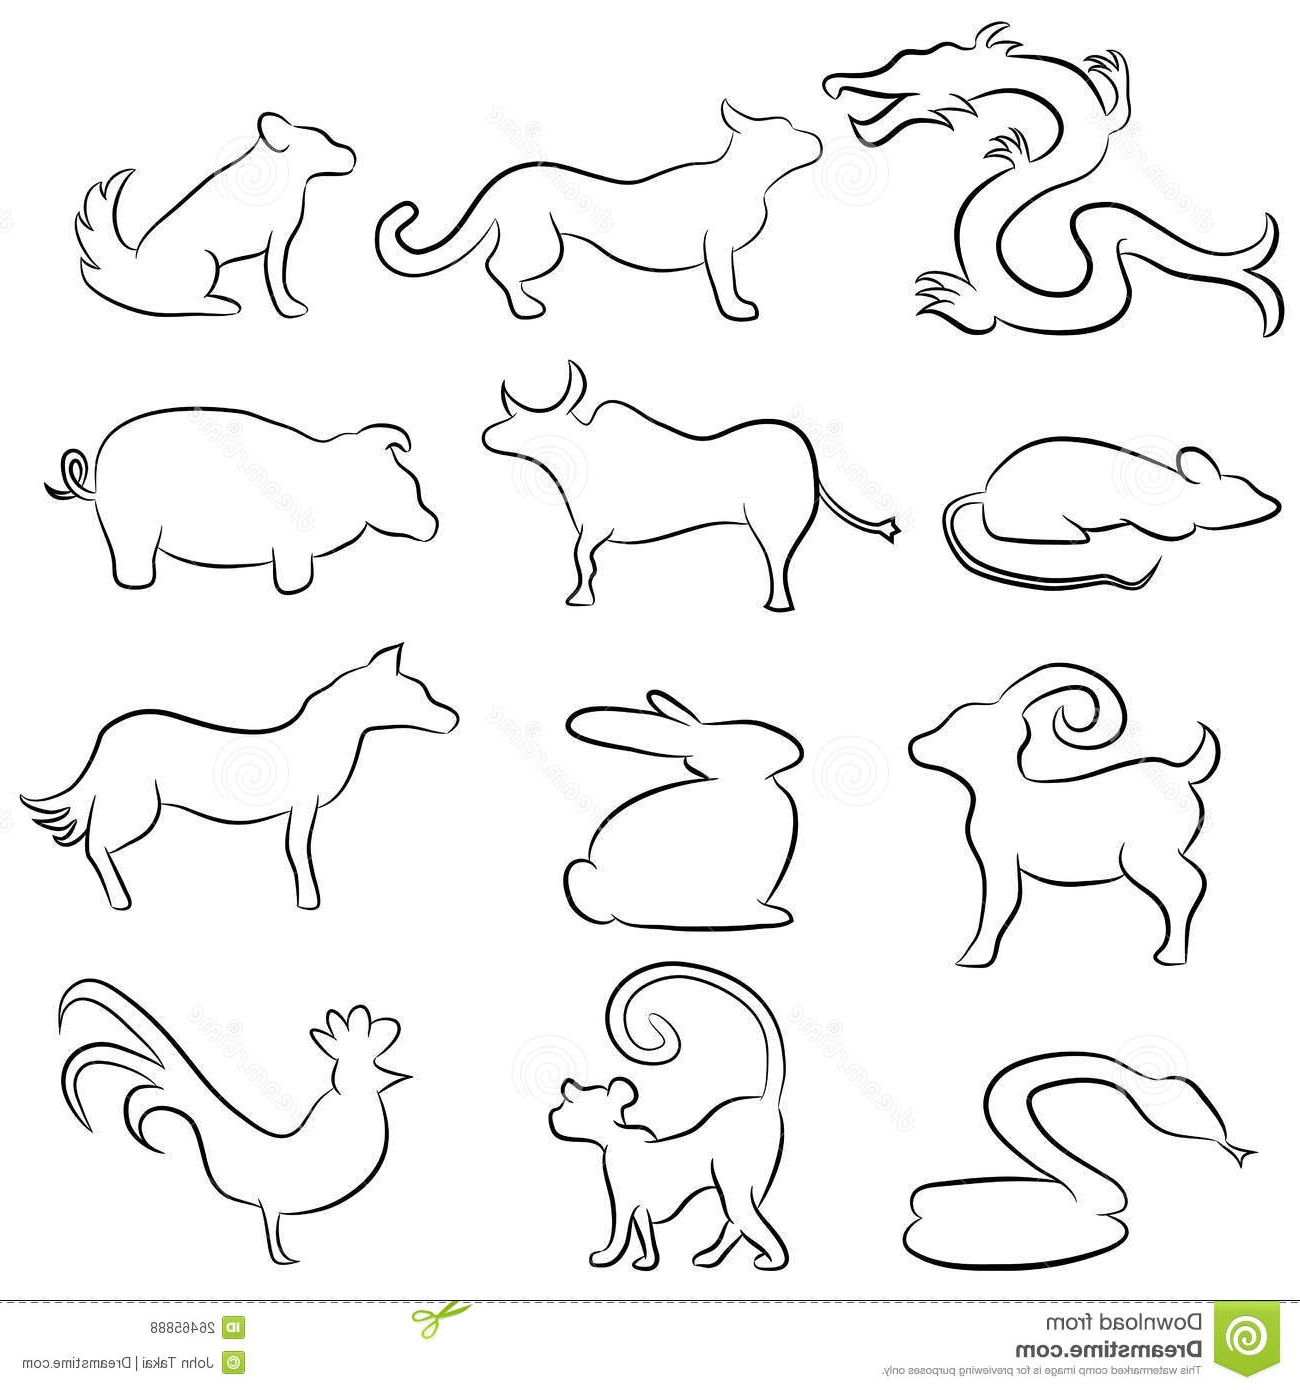 Animal Dessin Cool Photos Chinese astrology Animal Line Drawings Royalty Free Stock